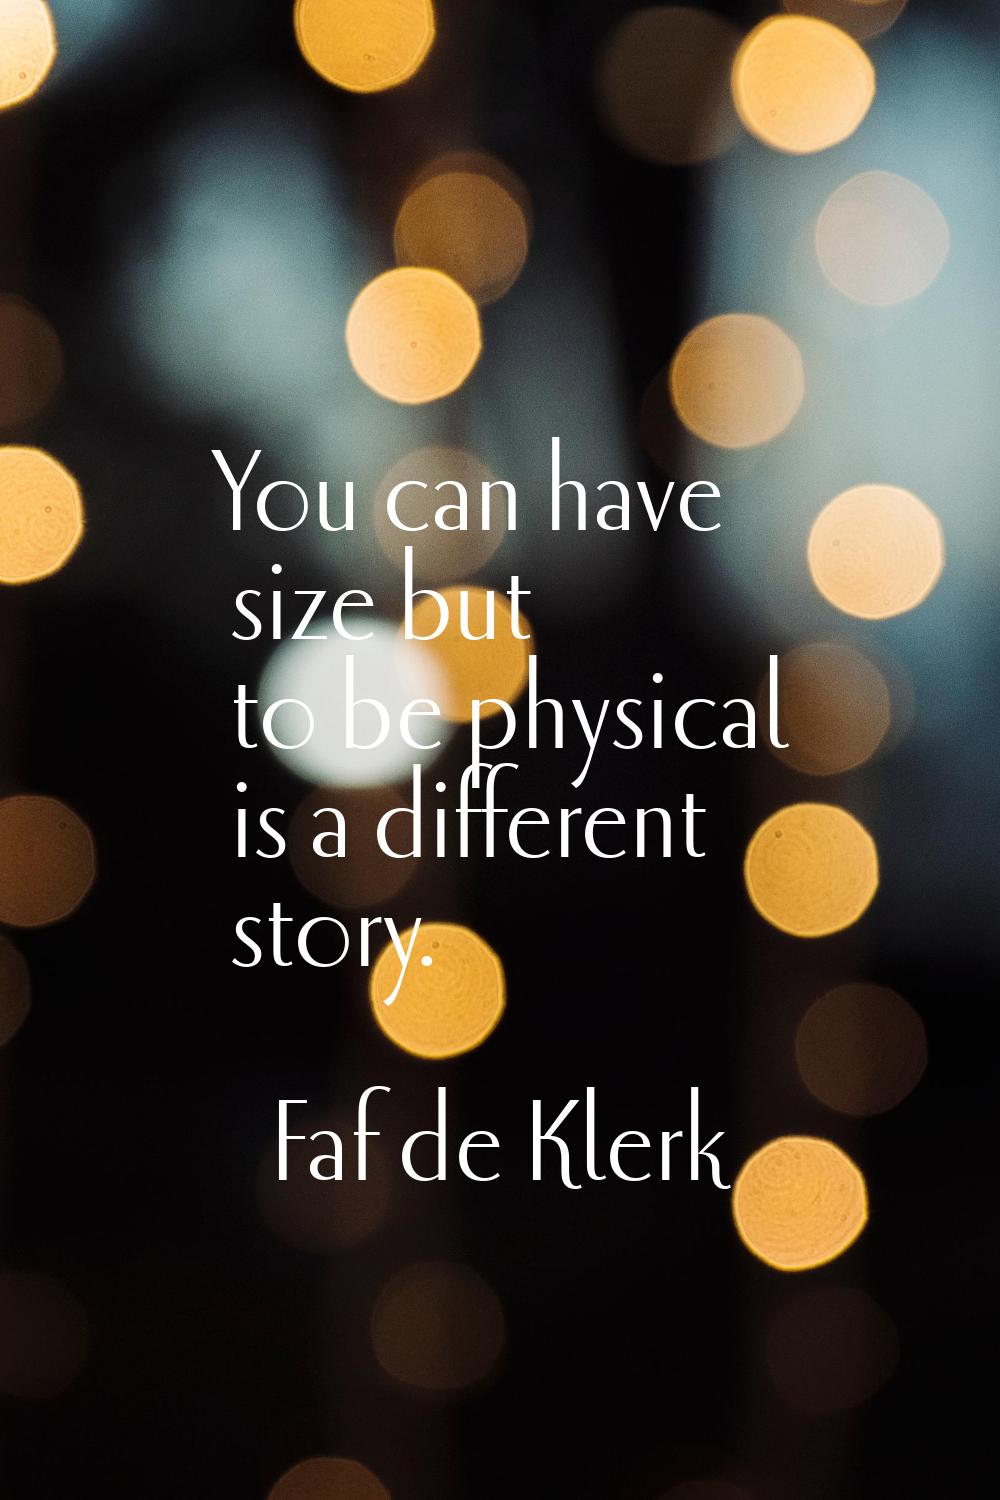 You can have size but to be physical is a different story.